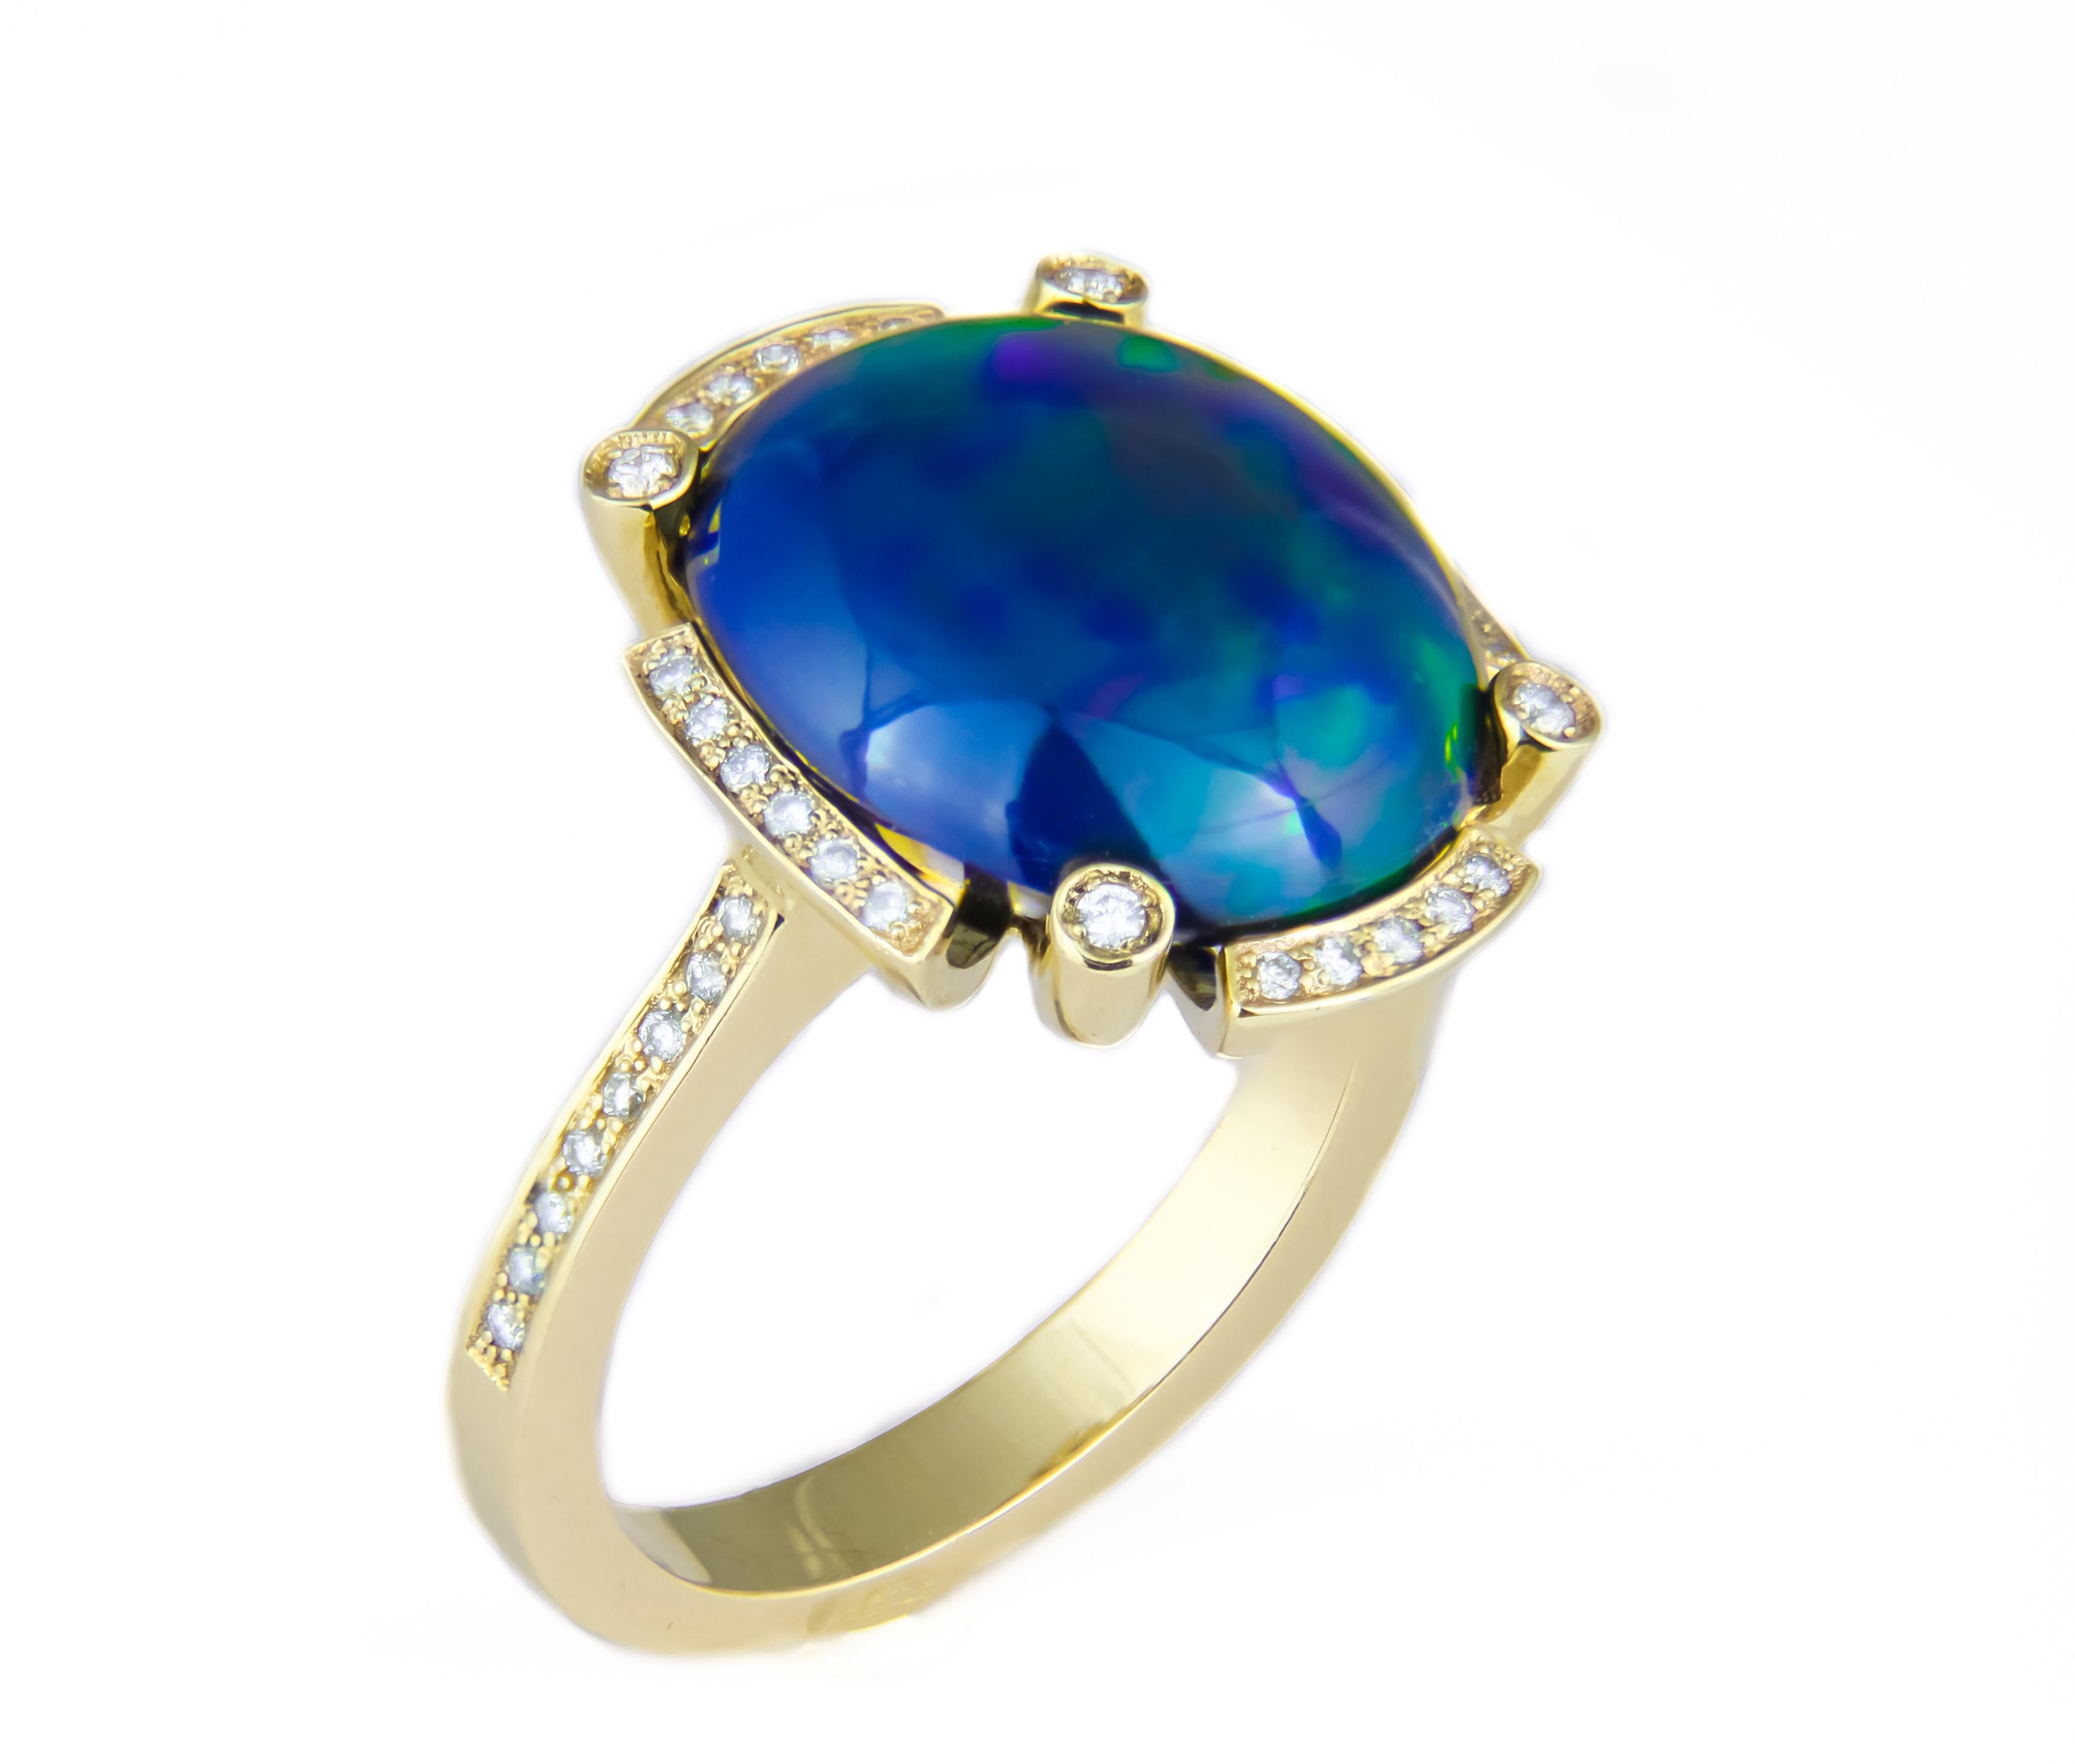 For Sale:  Black Opal and Diamonds Ring in 14k Gold. Gold Ring with Opal ! 6